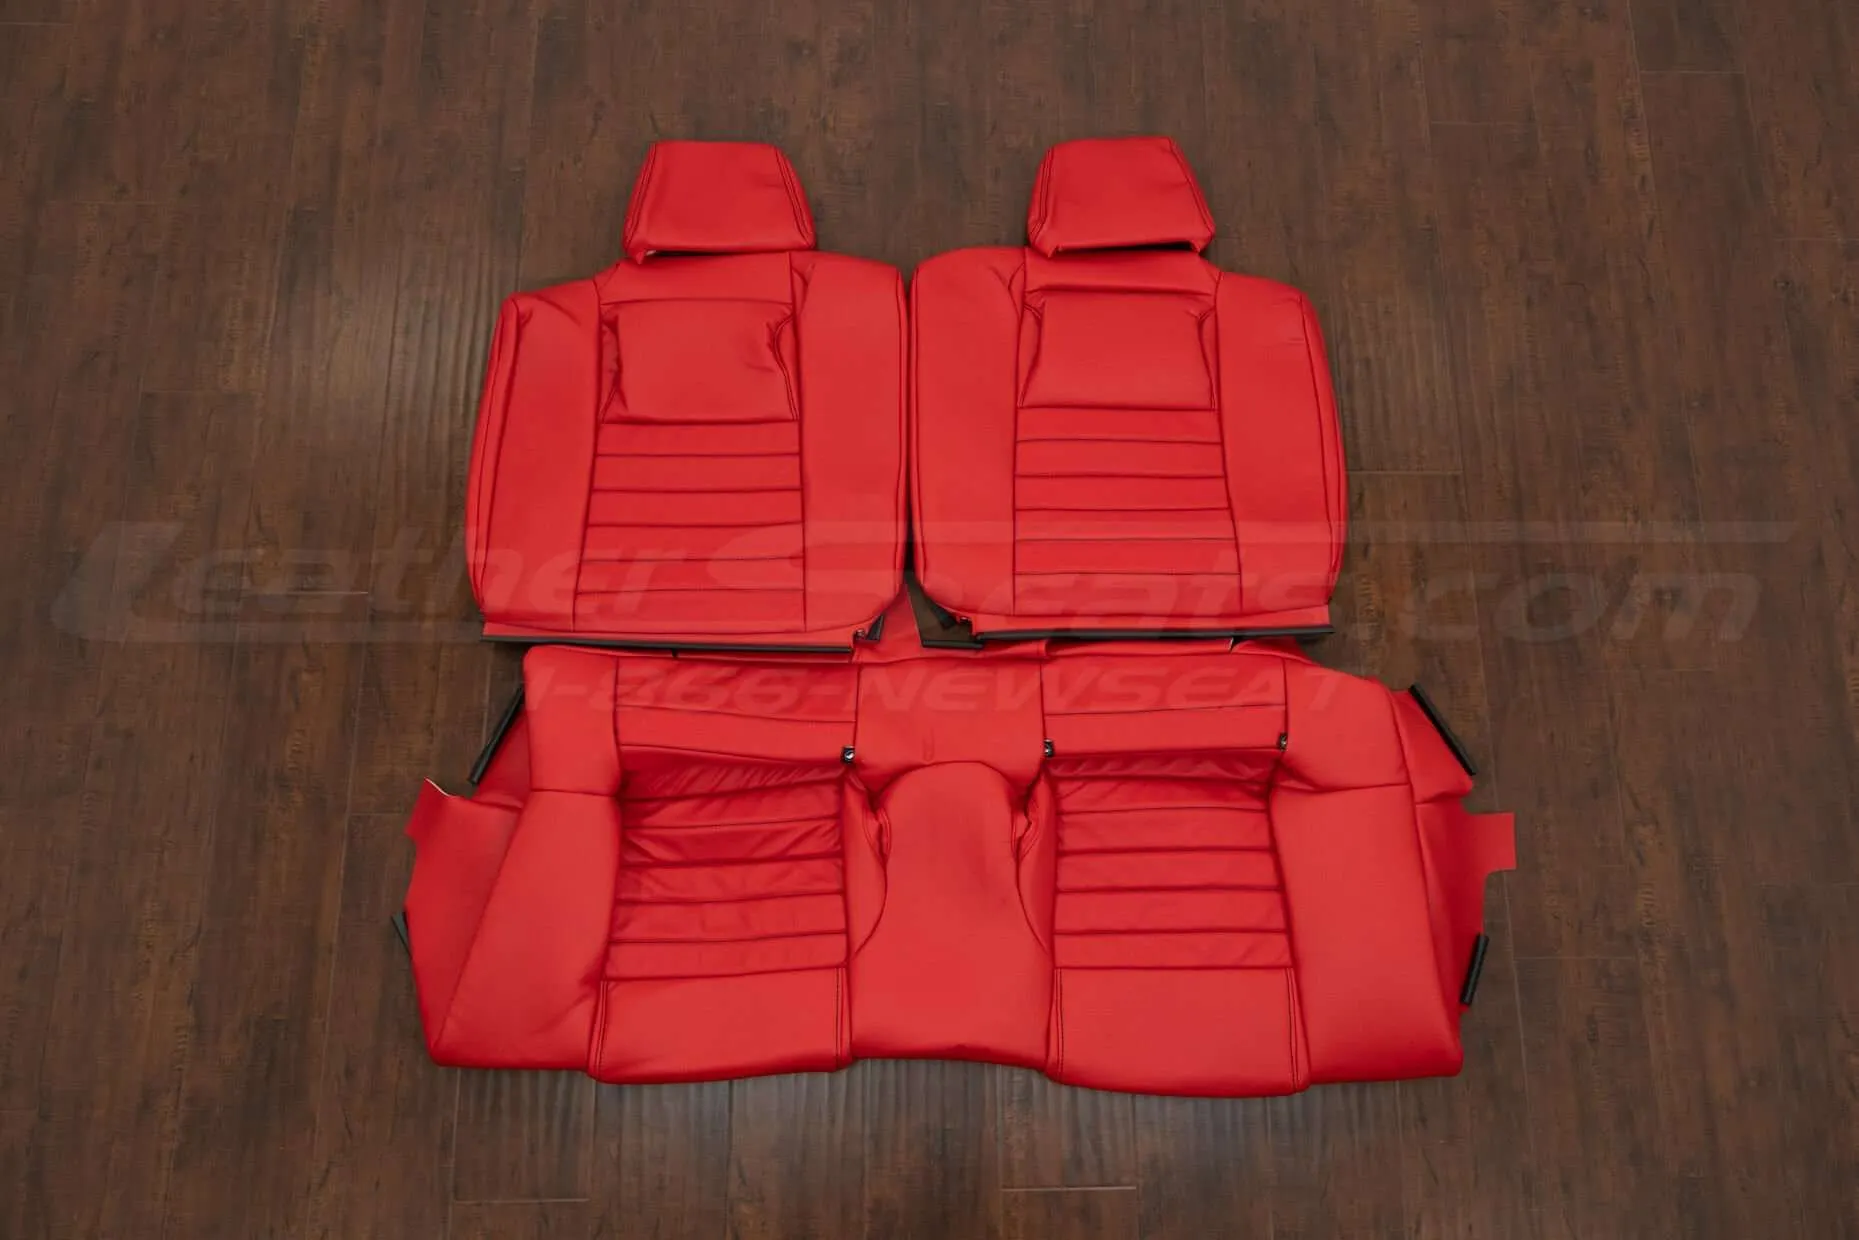 Ford Mustang rear leather seat upholstery in Bright Red